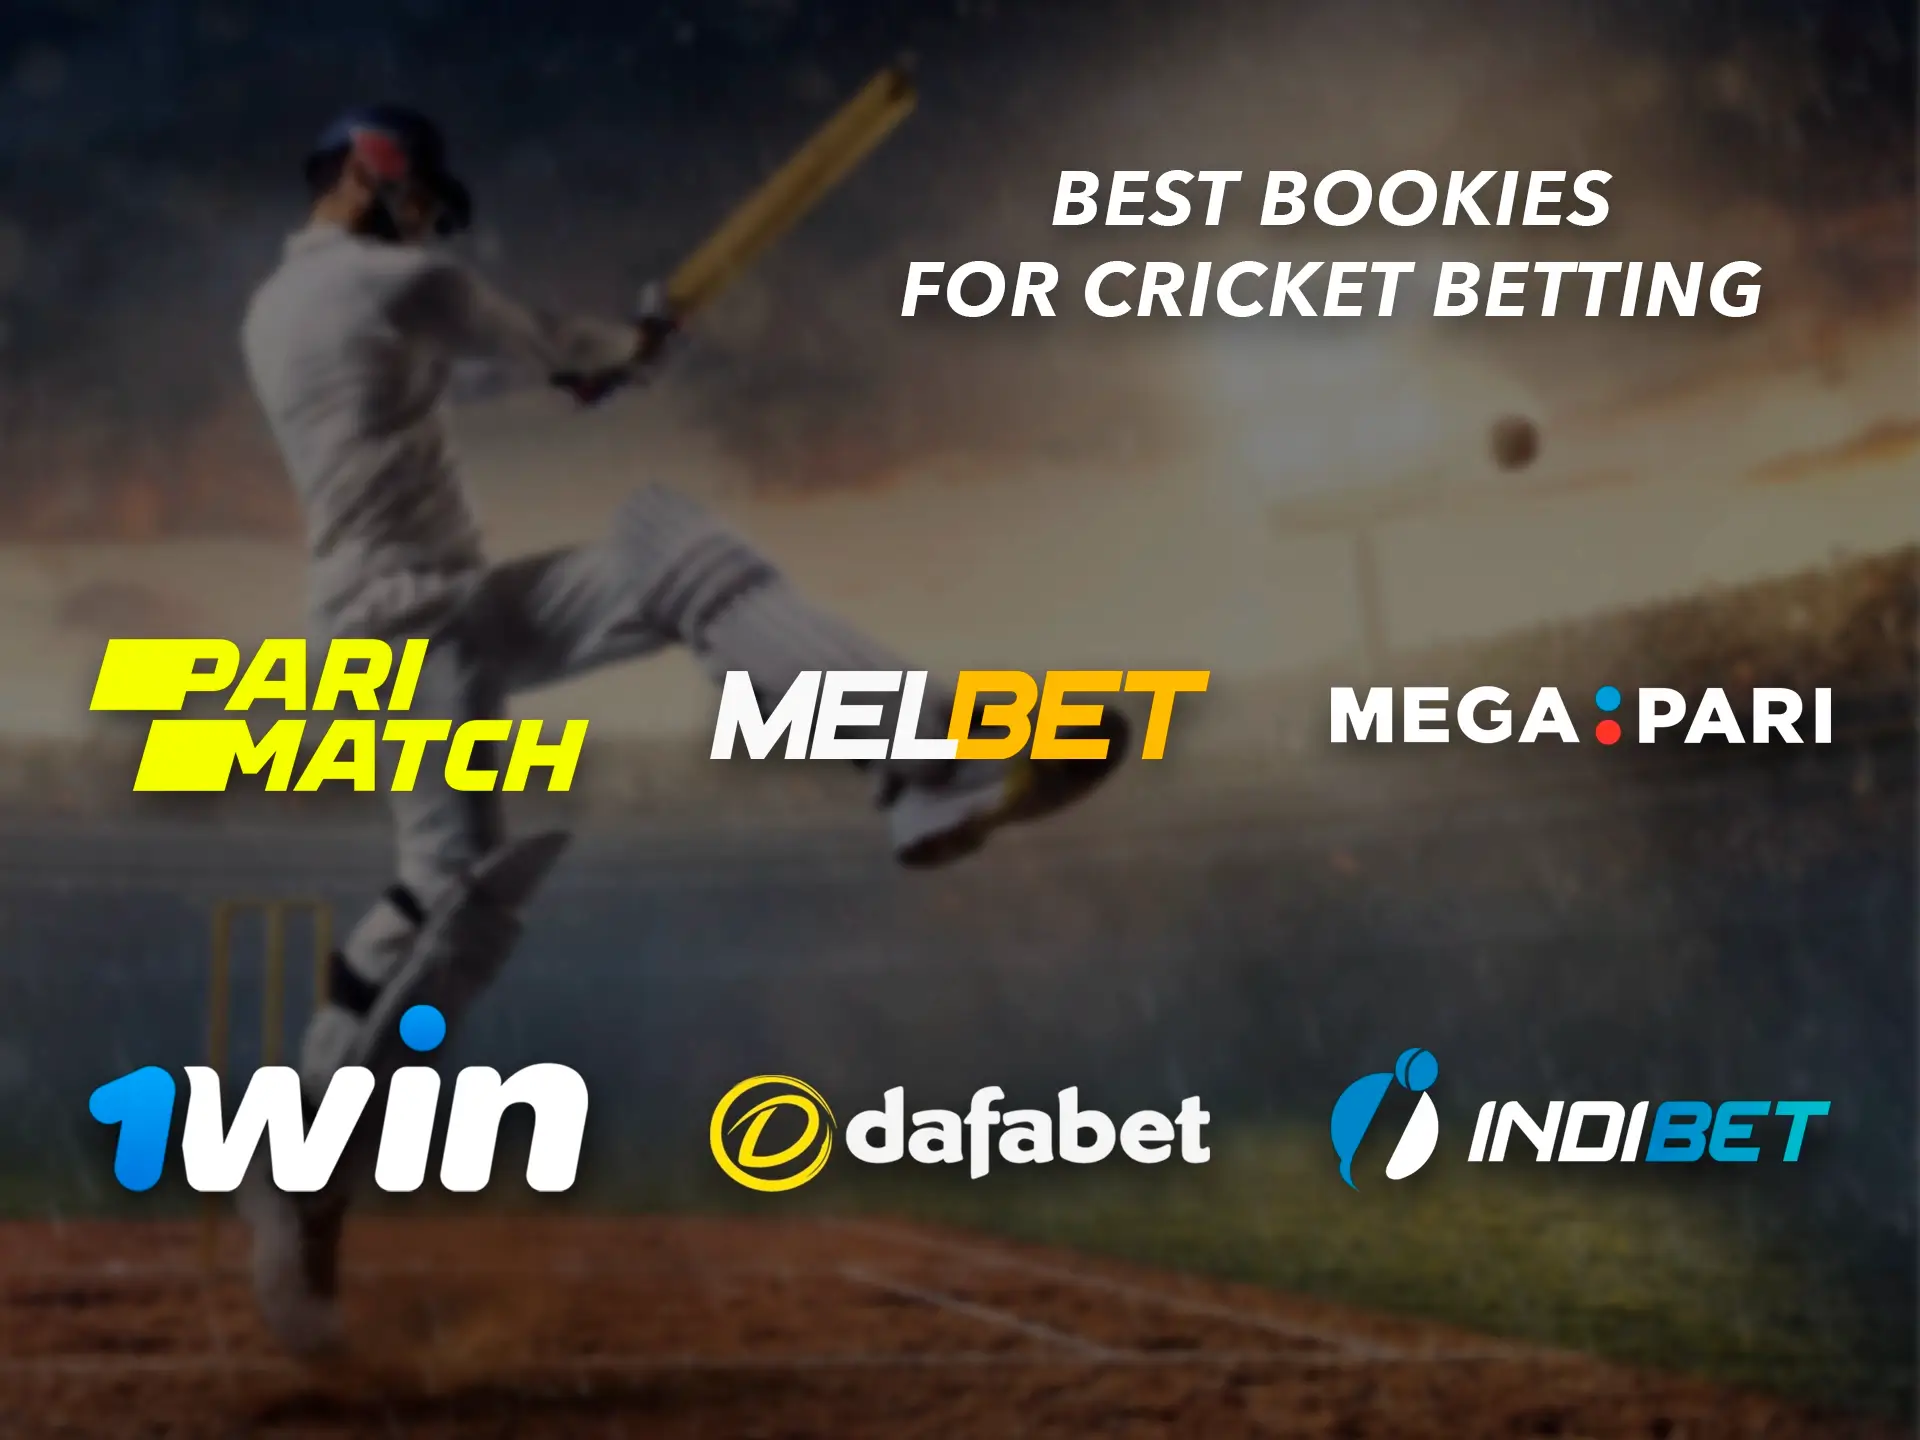 Sportbettingindia will always tell you the best bookmakers and how to make a profitable cricket bet.